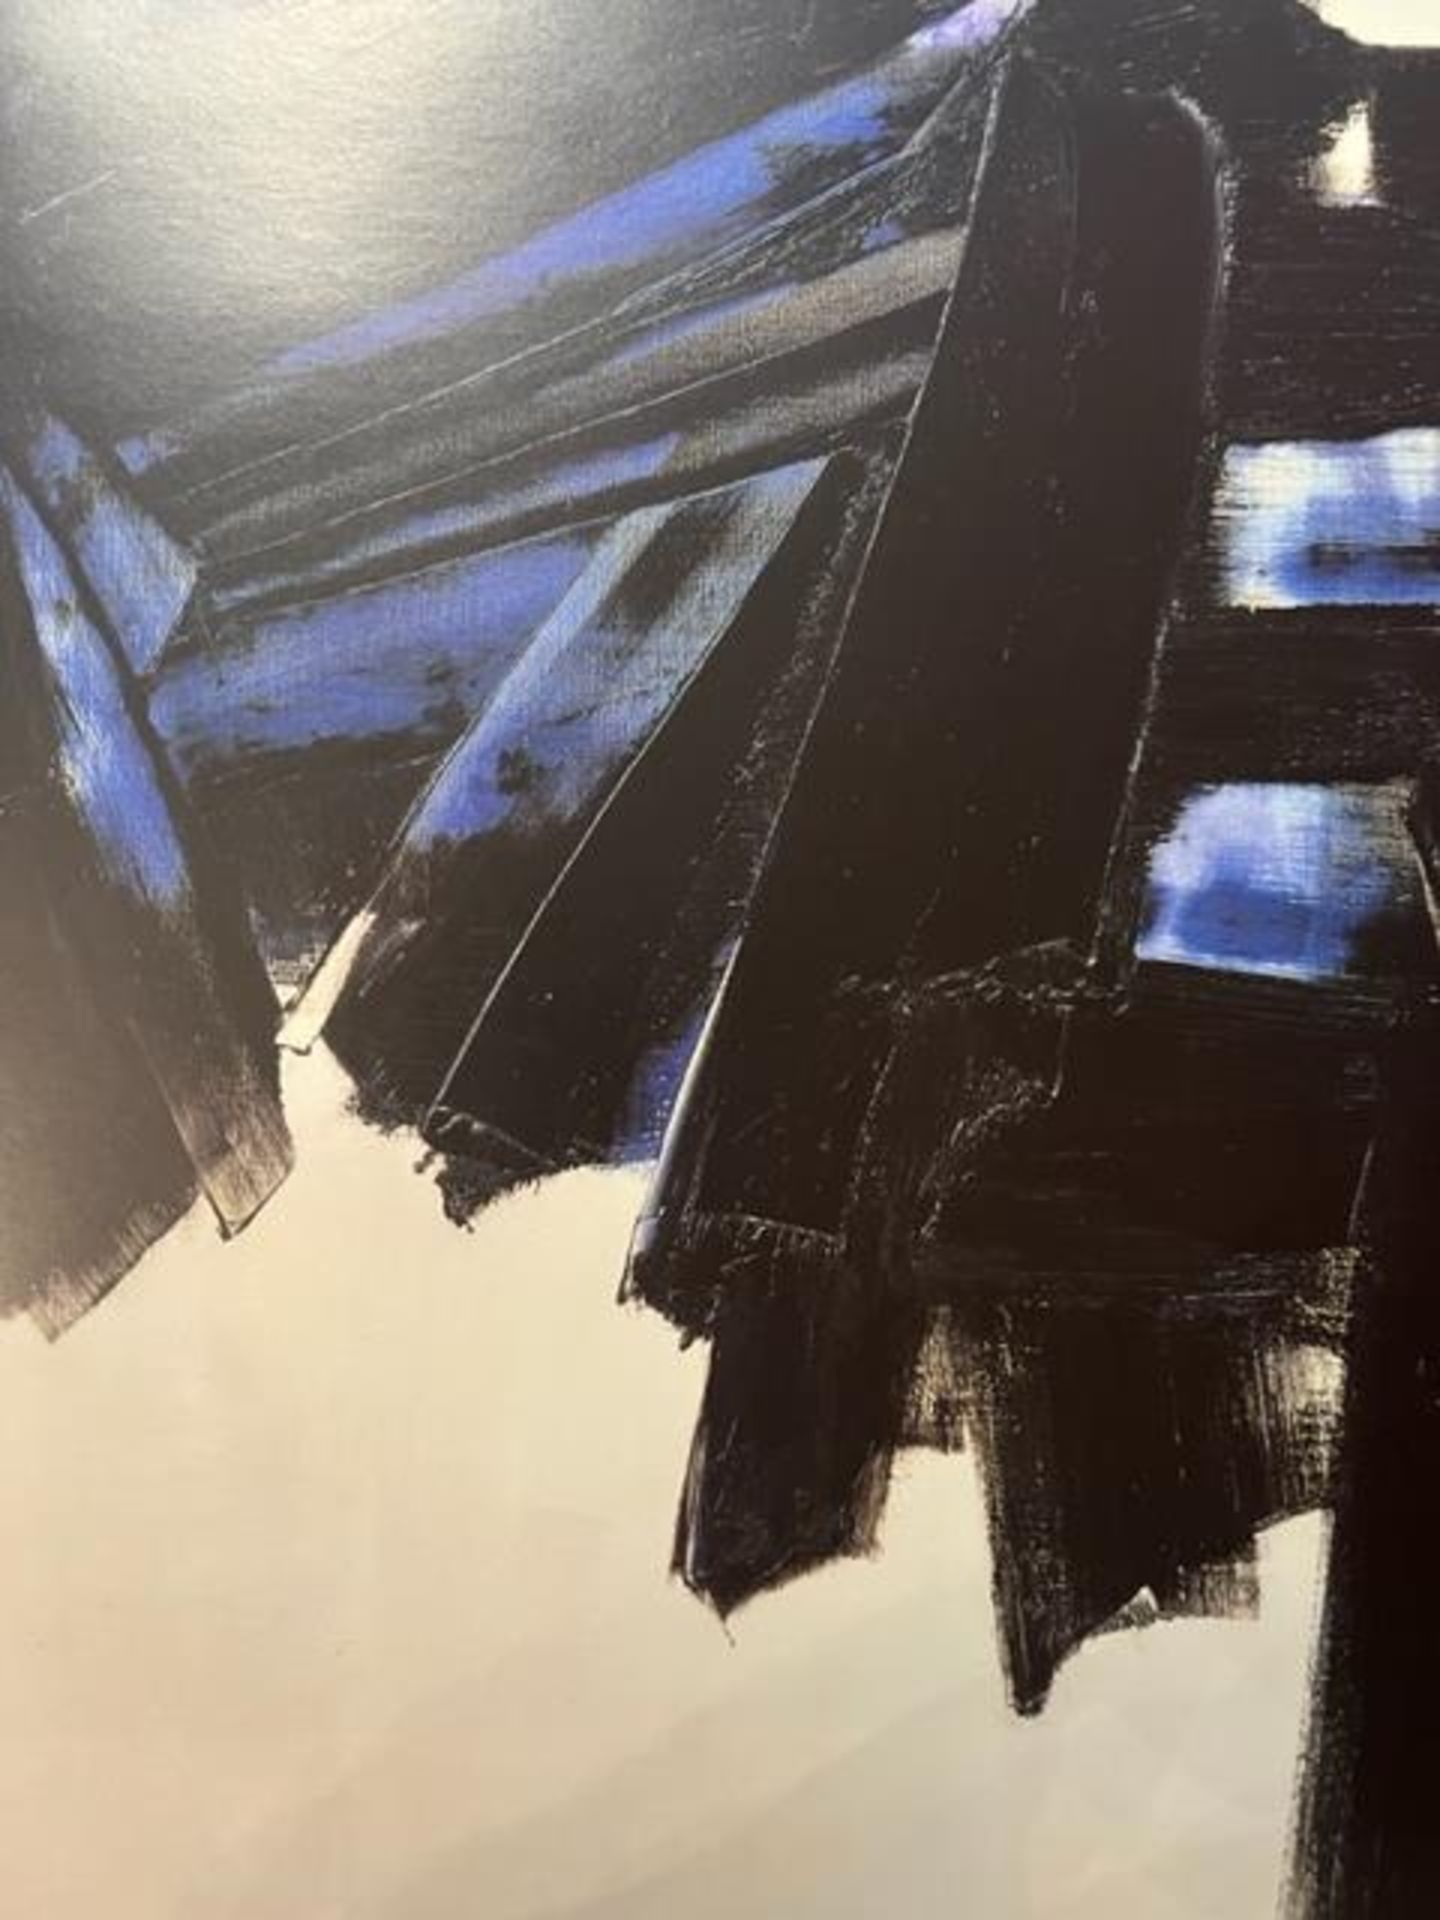 Pierre Soulages "Untitled" Print. - Image 4 of 6